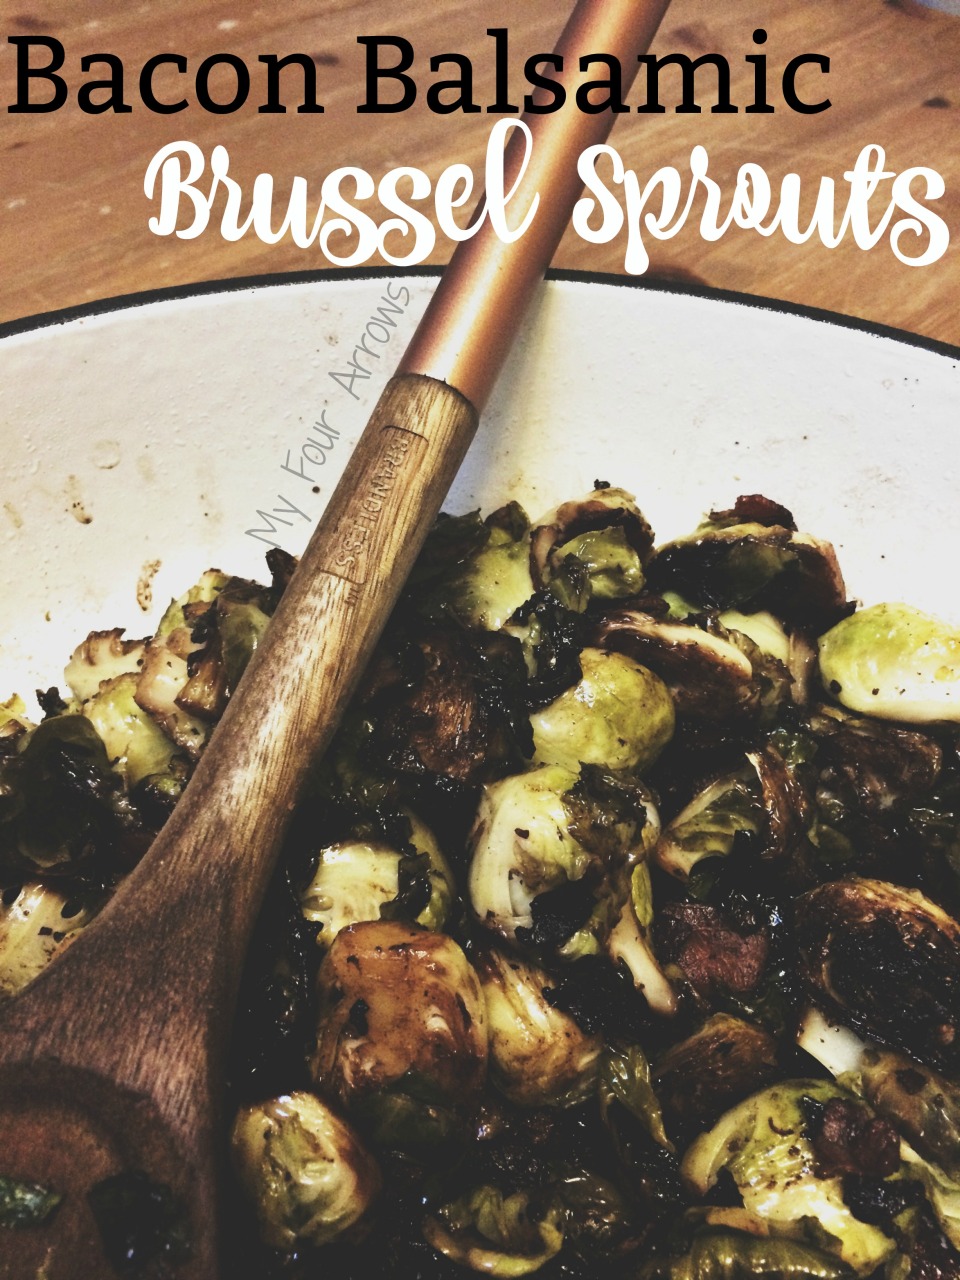 Bacon Balsamic Brussel Sprouts